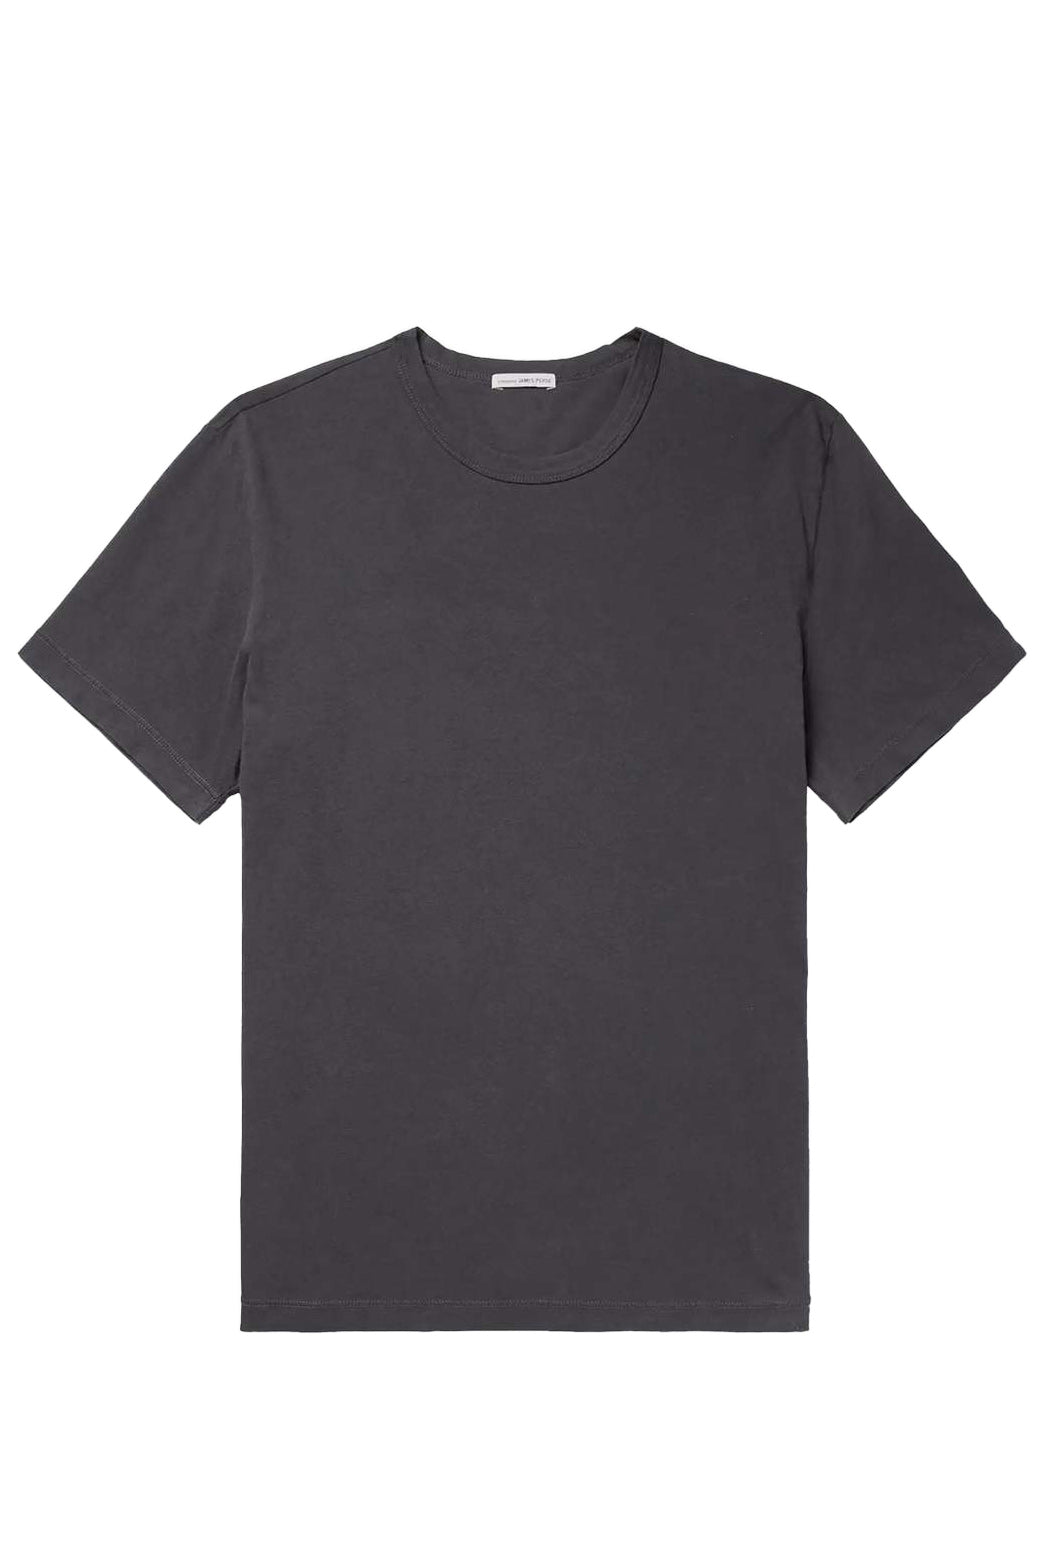 James Perse Jersey Crew Tee in Carbon